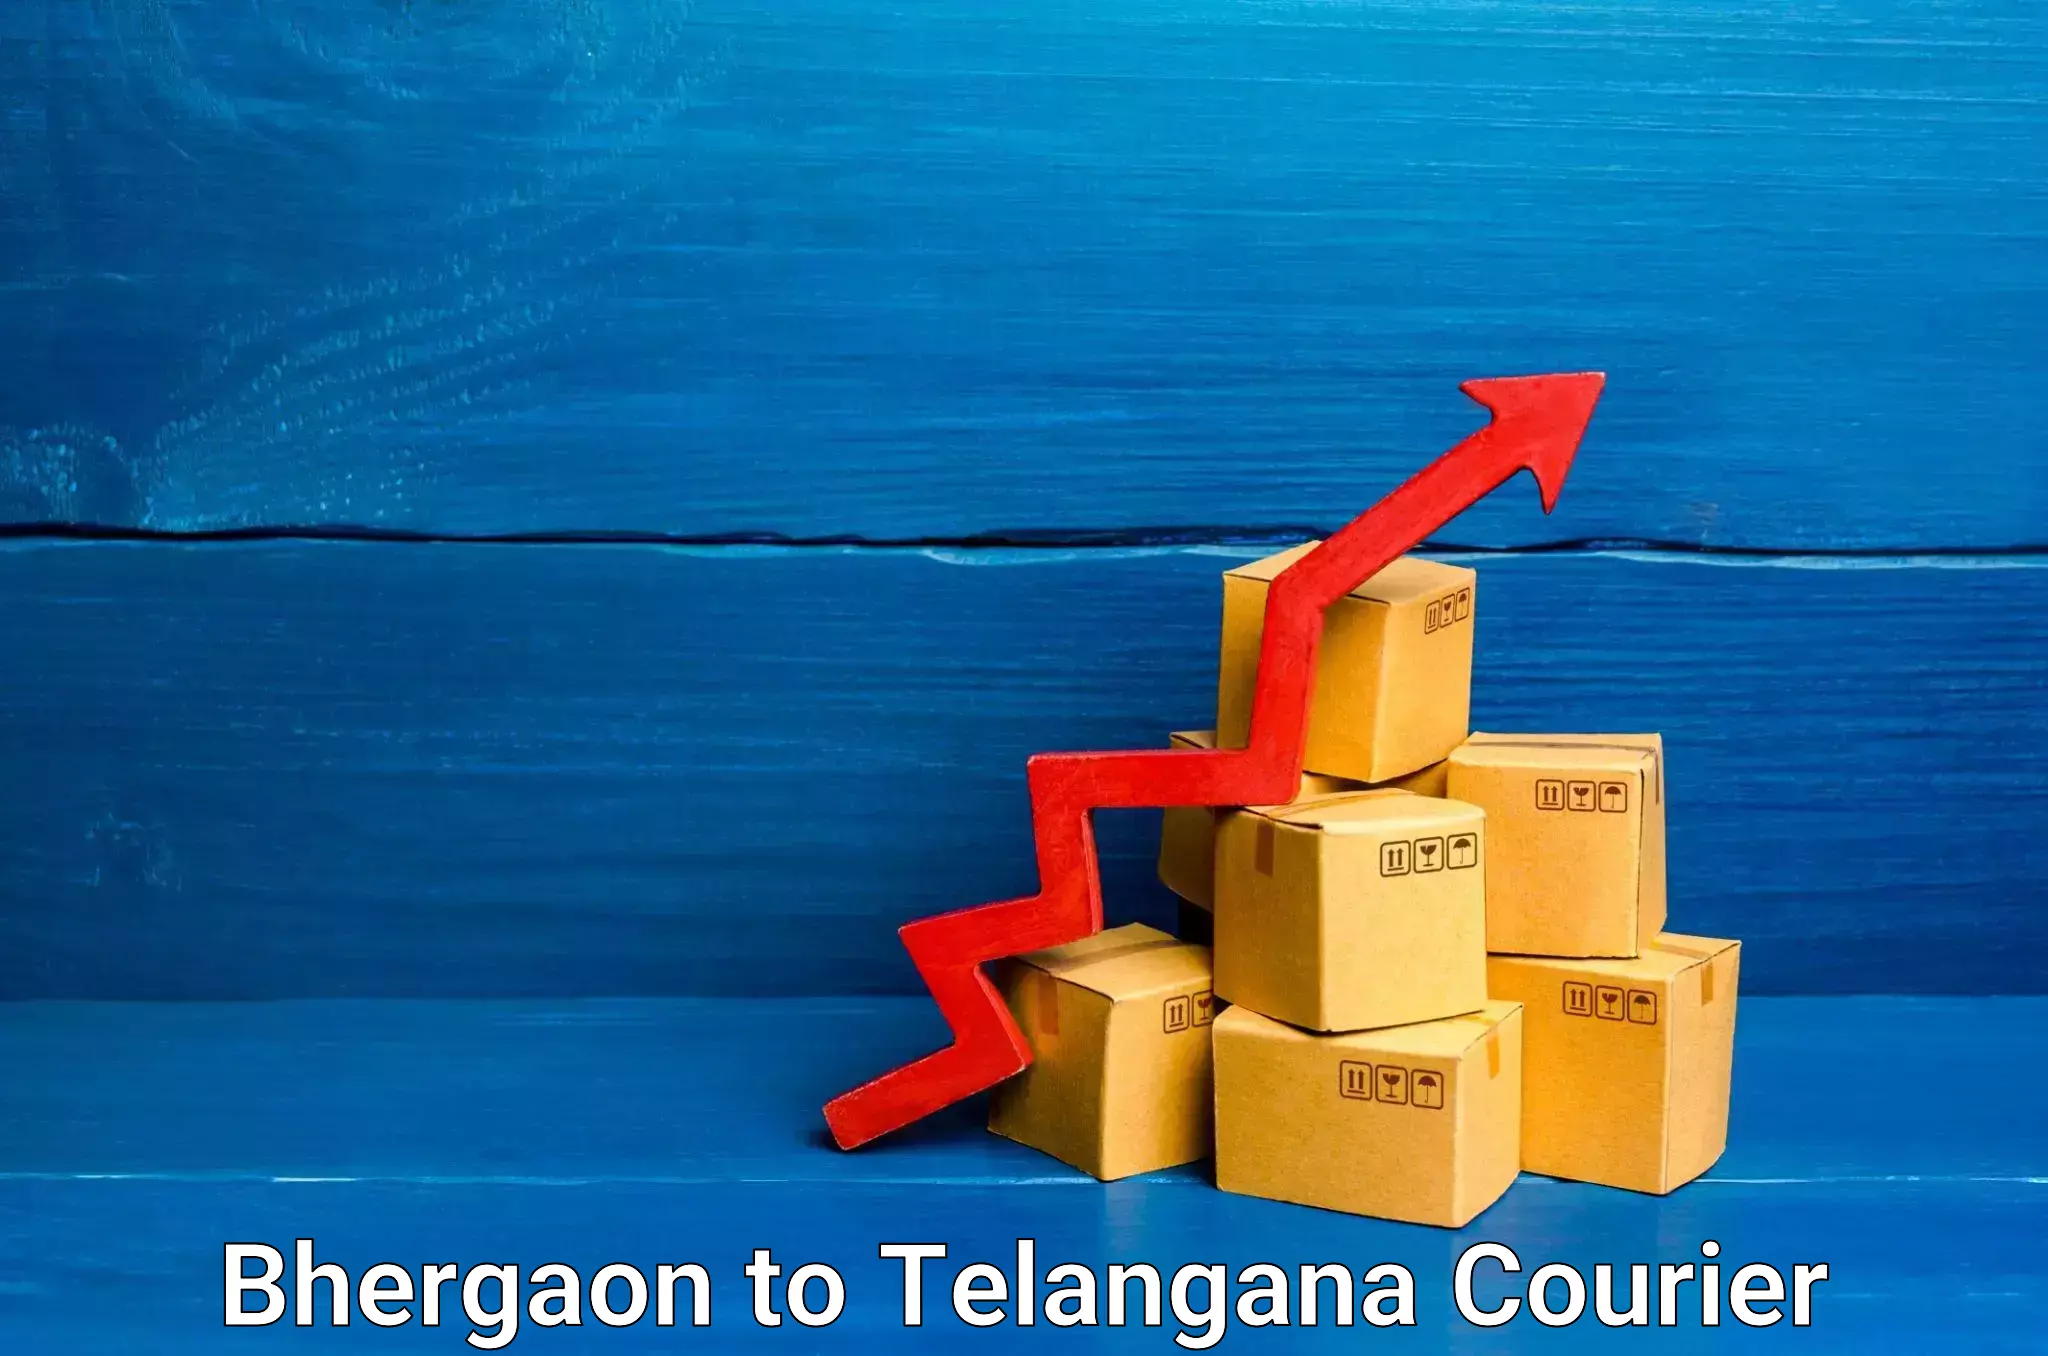 Overnight delivery services Bhergaon to Telangana